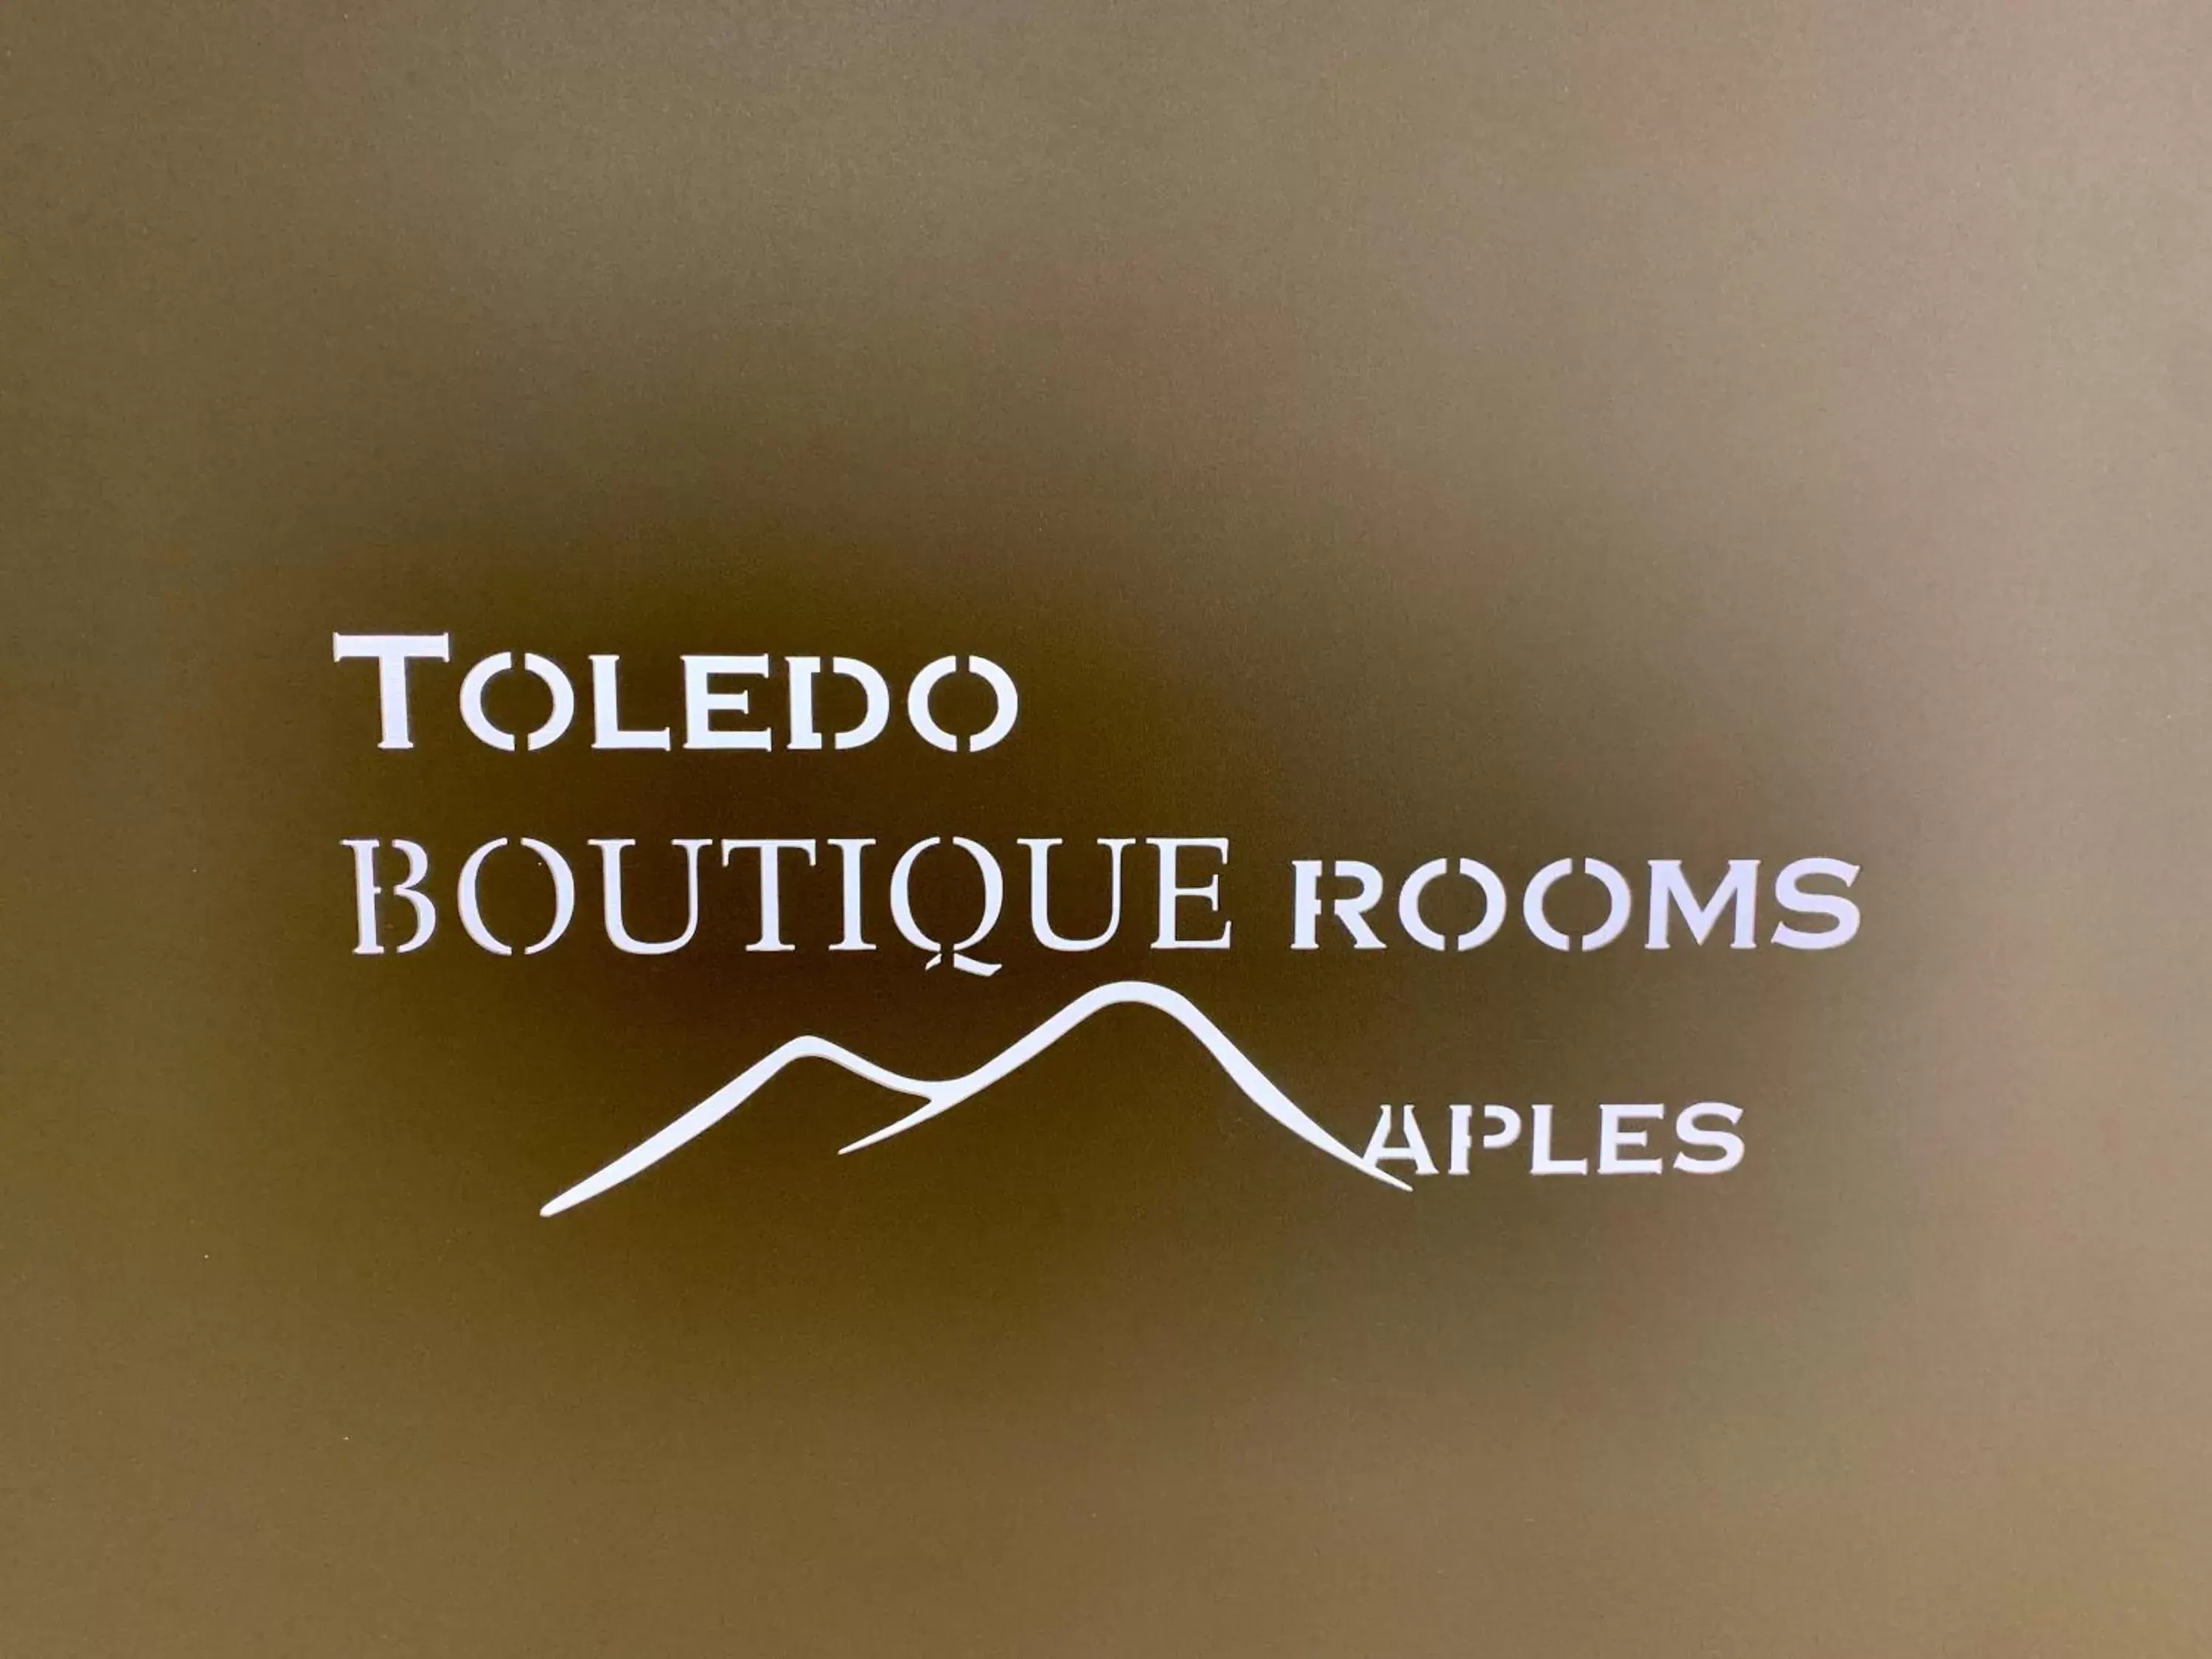 Property logo or sign in Toledo Boutique Rooms